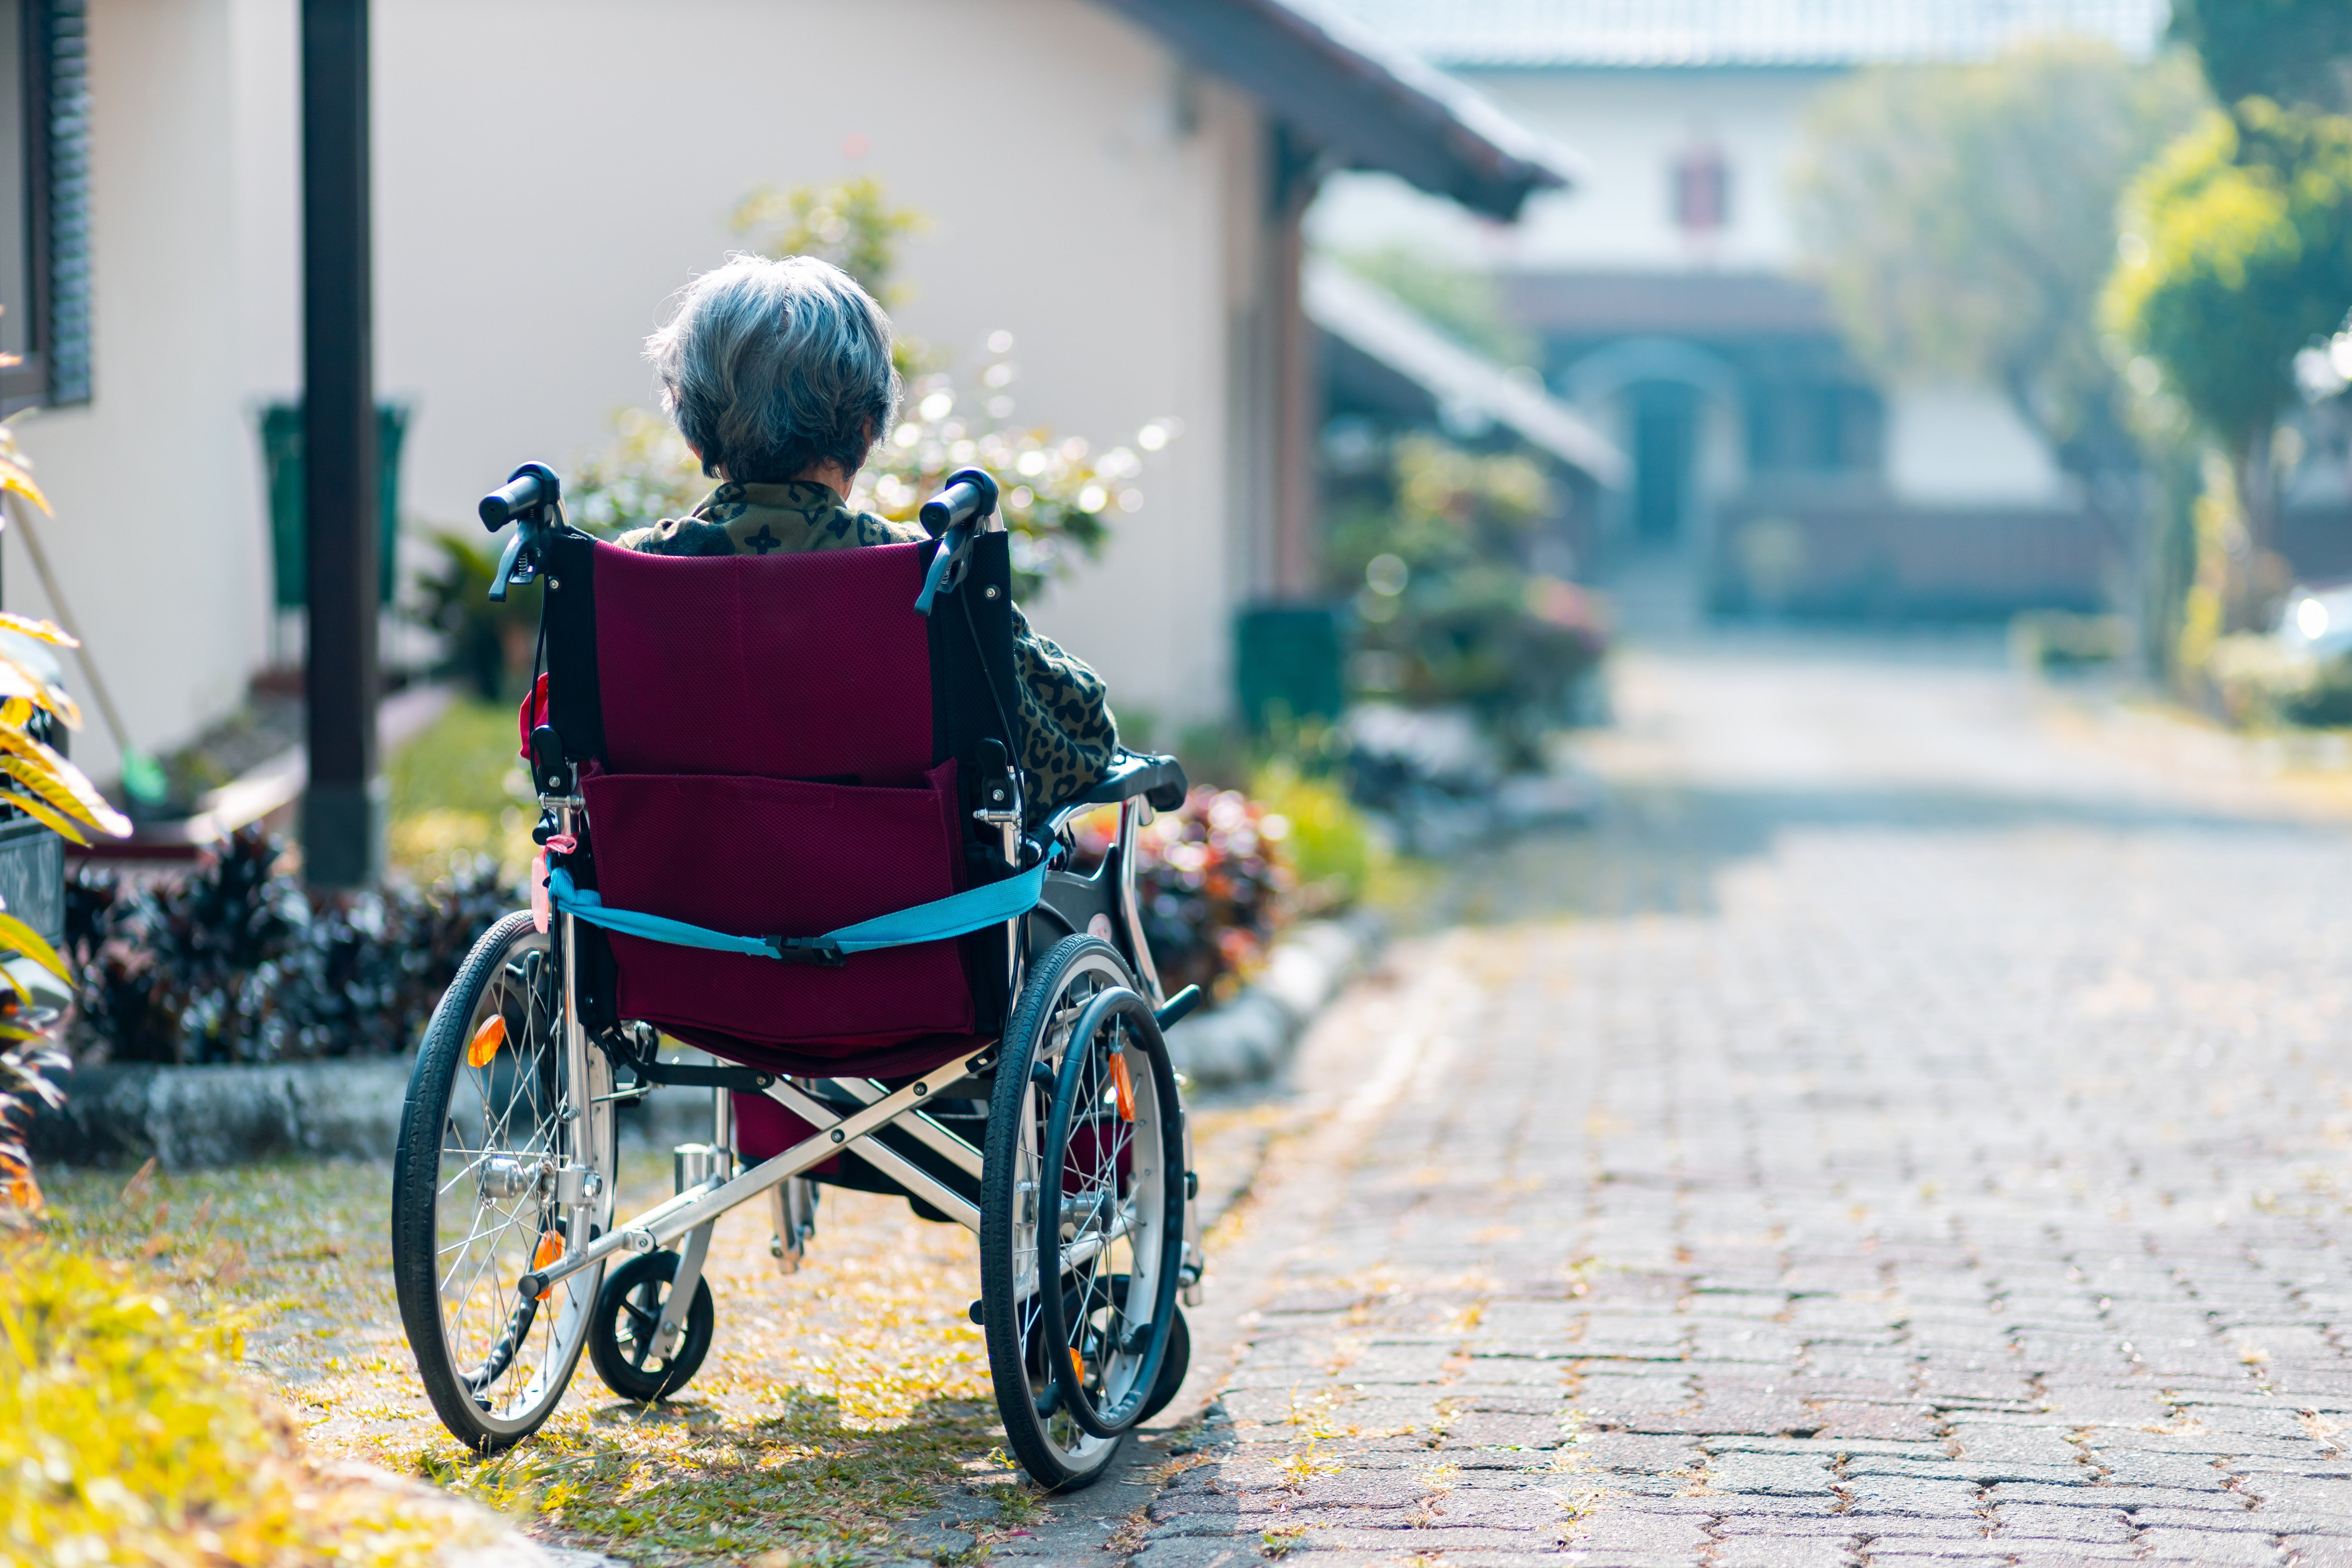 Mrs. Drummond was confined to a wheelchair after she suffered an injury | Photo: Unsplash